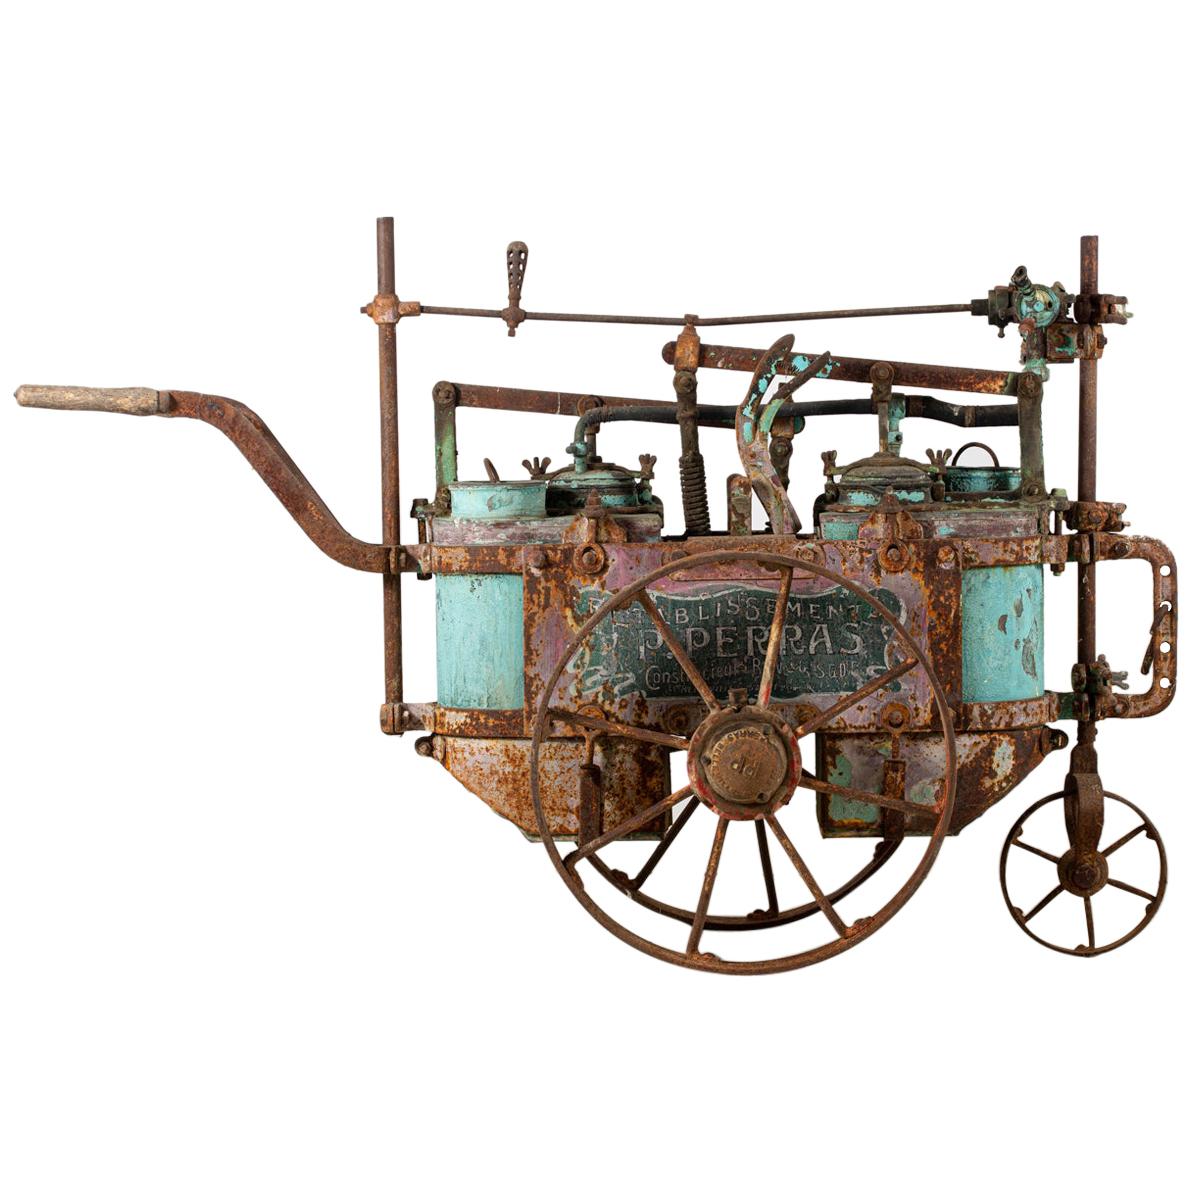 Old Mobile Sulphating Machine to Treat the Vine, Ets Perras, Frankreich, 1920-1930 im Angebot